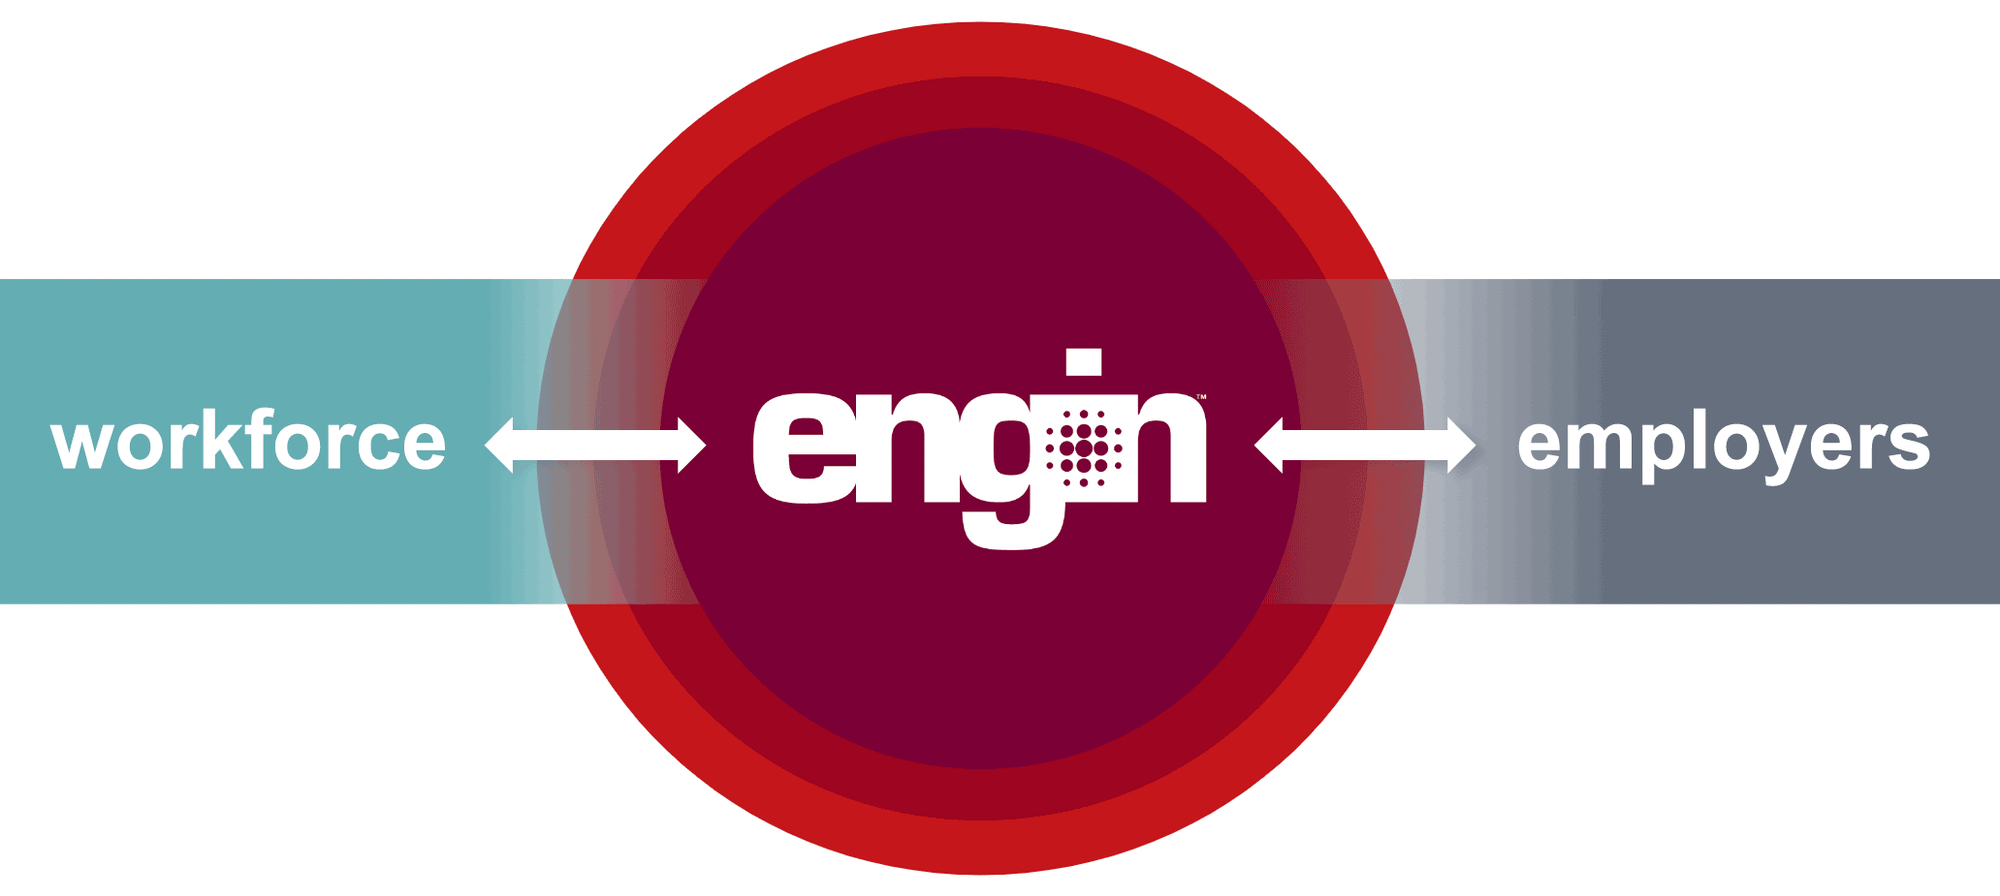 engin connects the workforce and employers